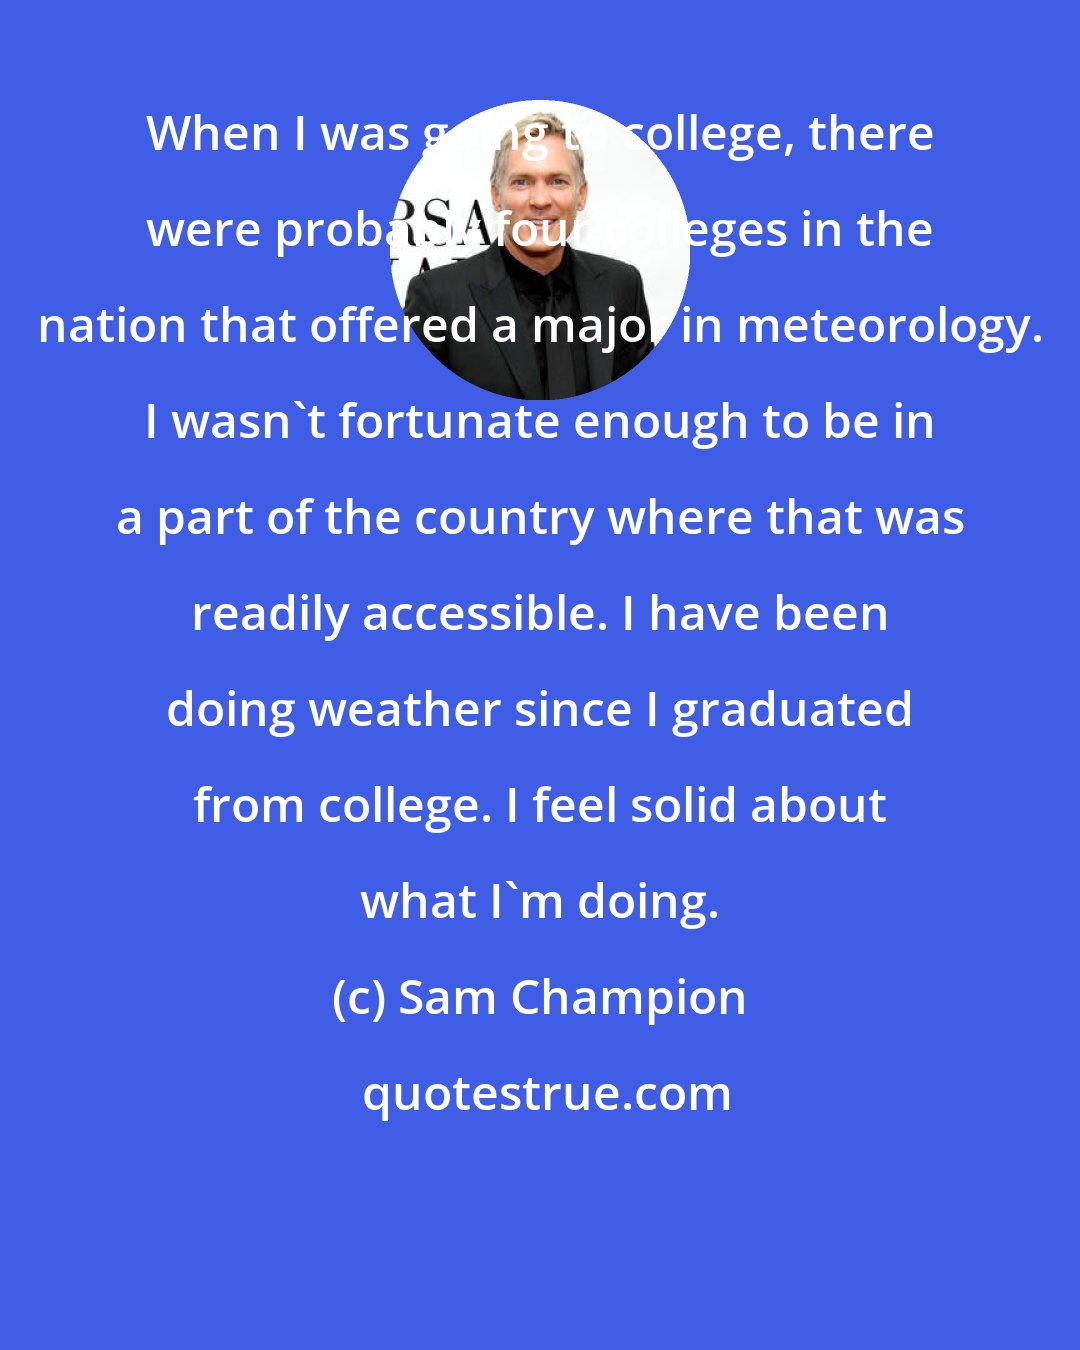 Sam Champion: When I was going to college, there were probably four colleges in the nation that offered a major in meteorology. I wasn't fortunate enough to be in a part of the country where that was readily accessible. I have been doing weather since I graduated from college. I feel solid about what I'm doing.